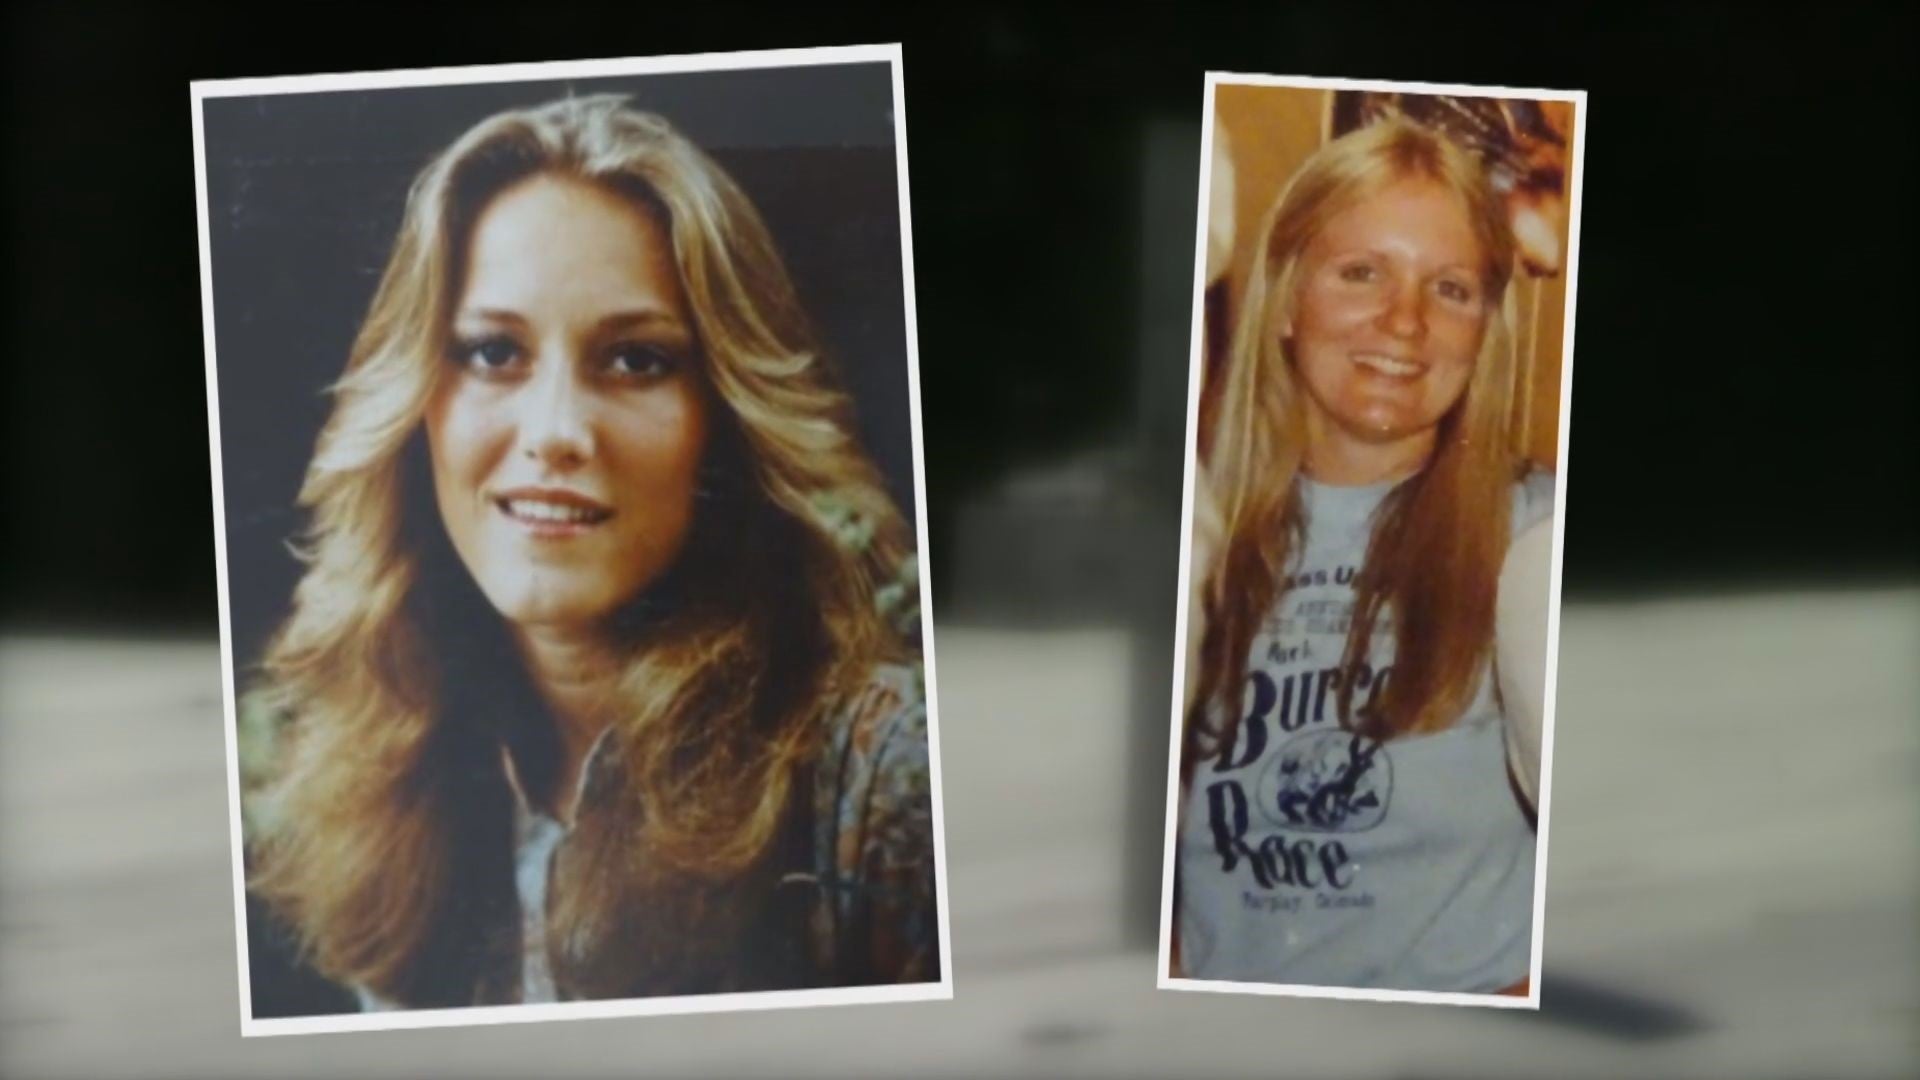 Annette Schnee, 21, left, and Bobbie Jo Oberholtzer, 29, were found murdered in Colorado in 1982. A man has been arrested on suspicion of the double murder.